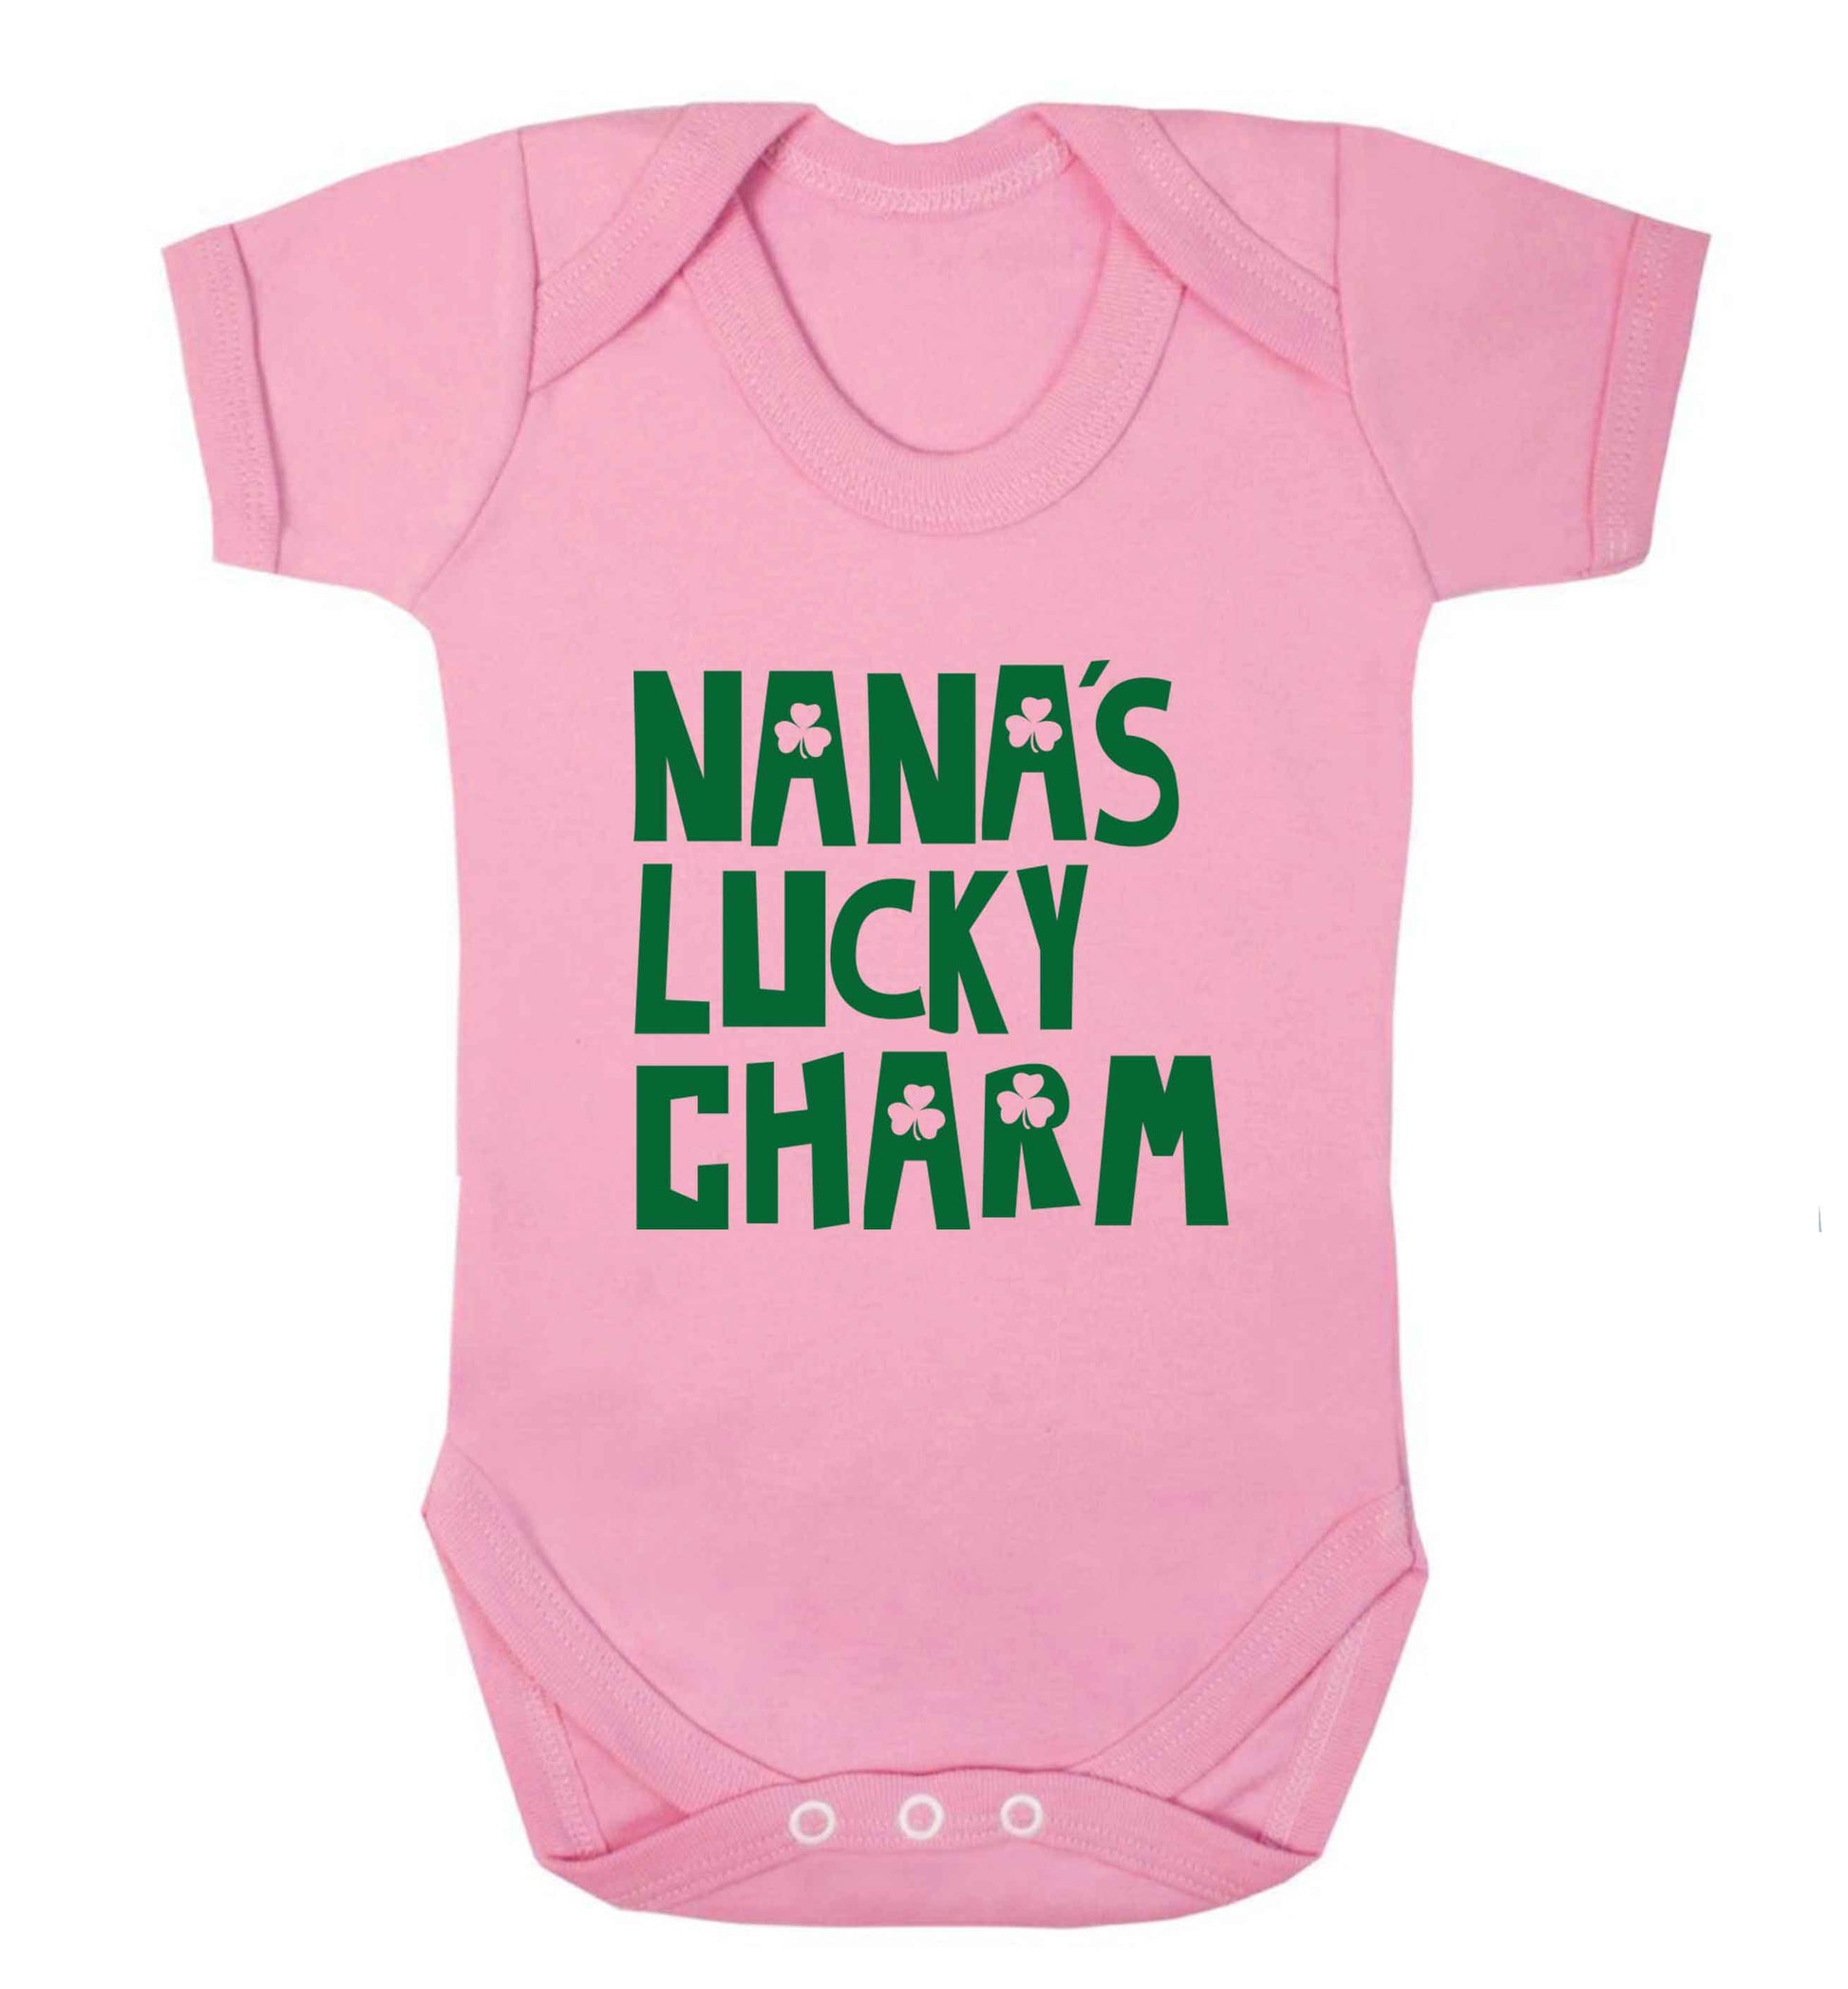 Nana's lucky charm baby vest pale pink 18-24 months